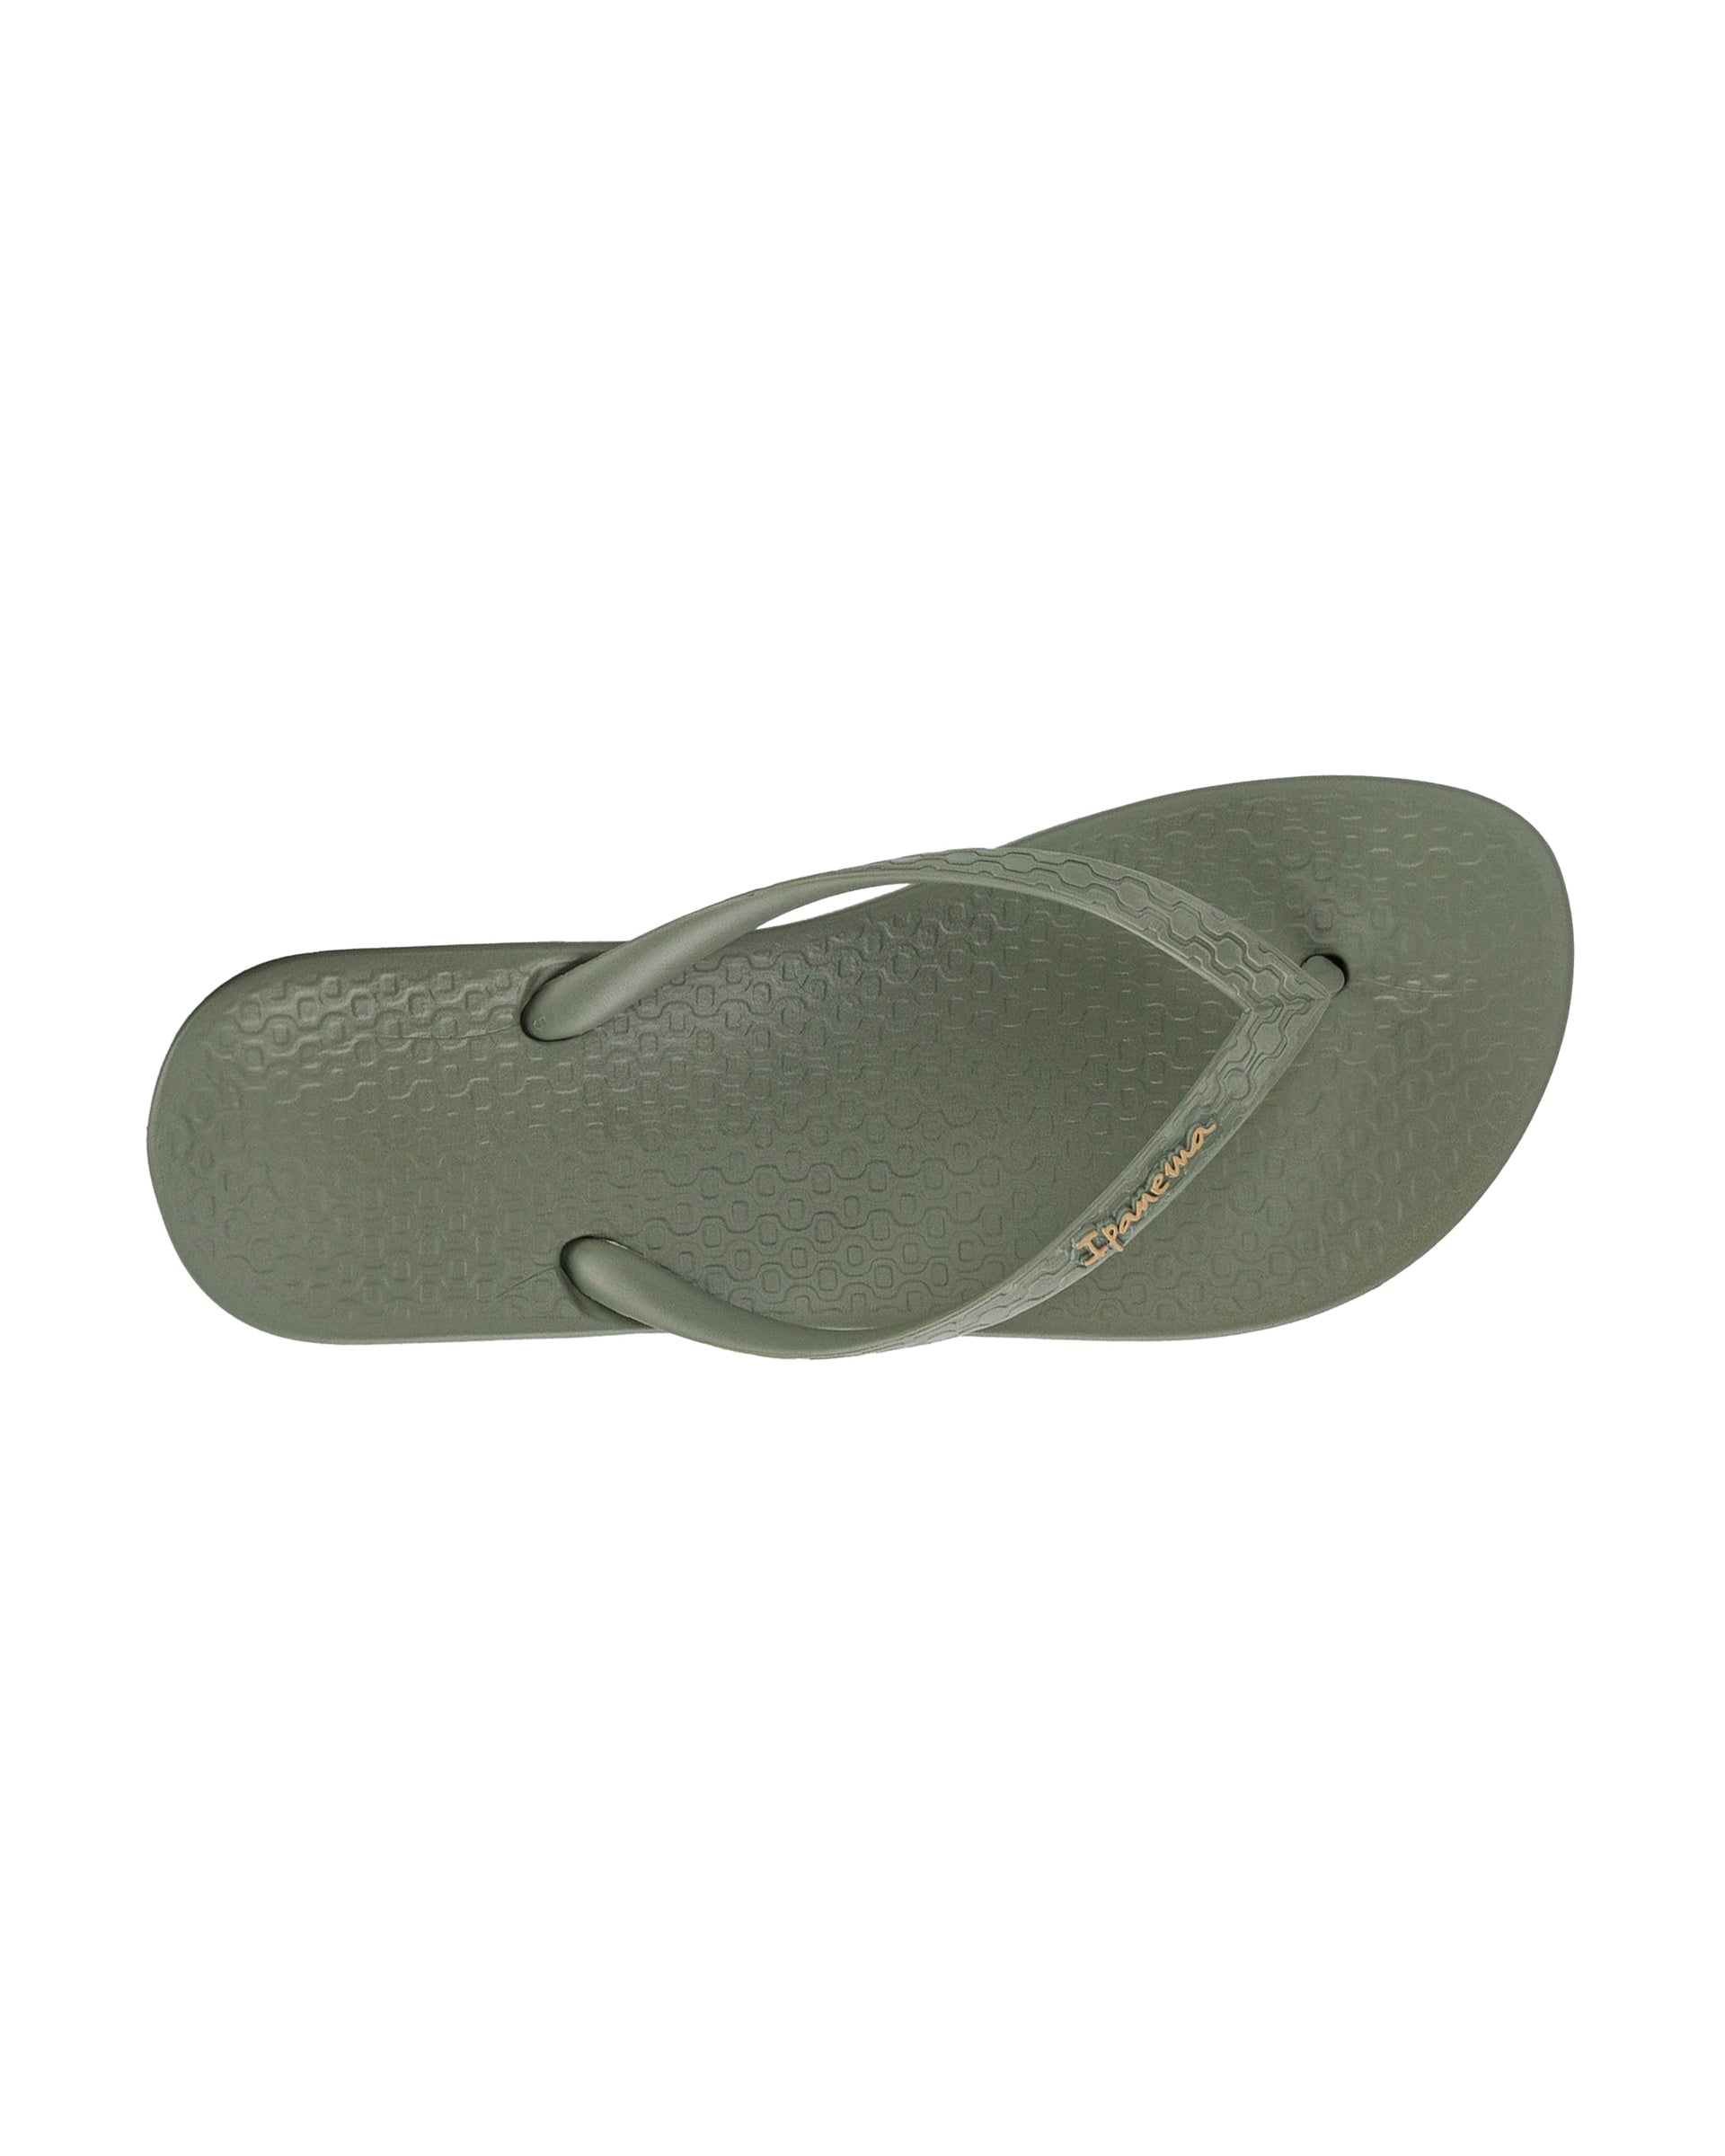 Top view of a green Ipanema Ana Colors women's flip flop.